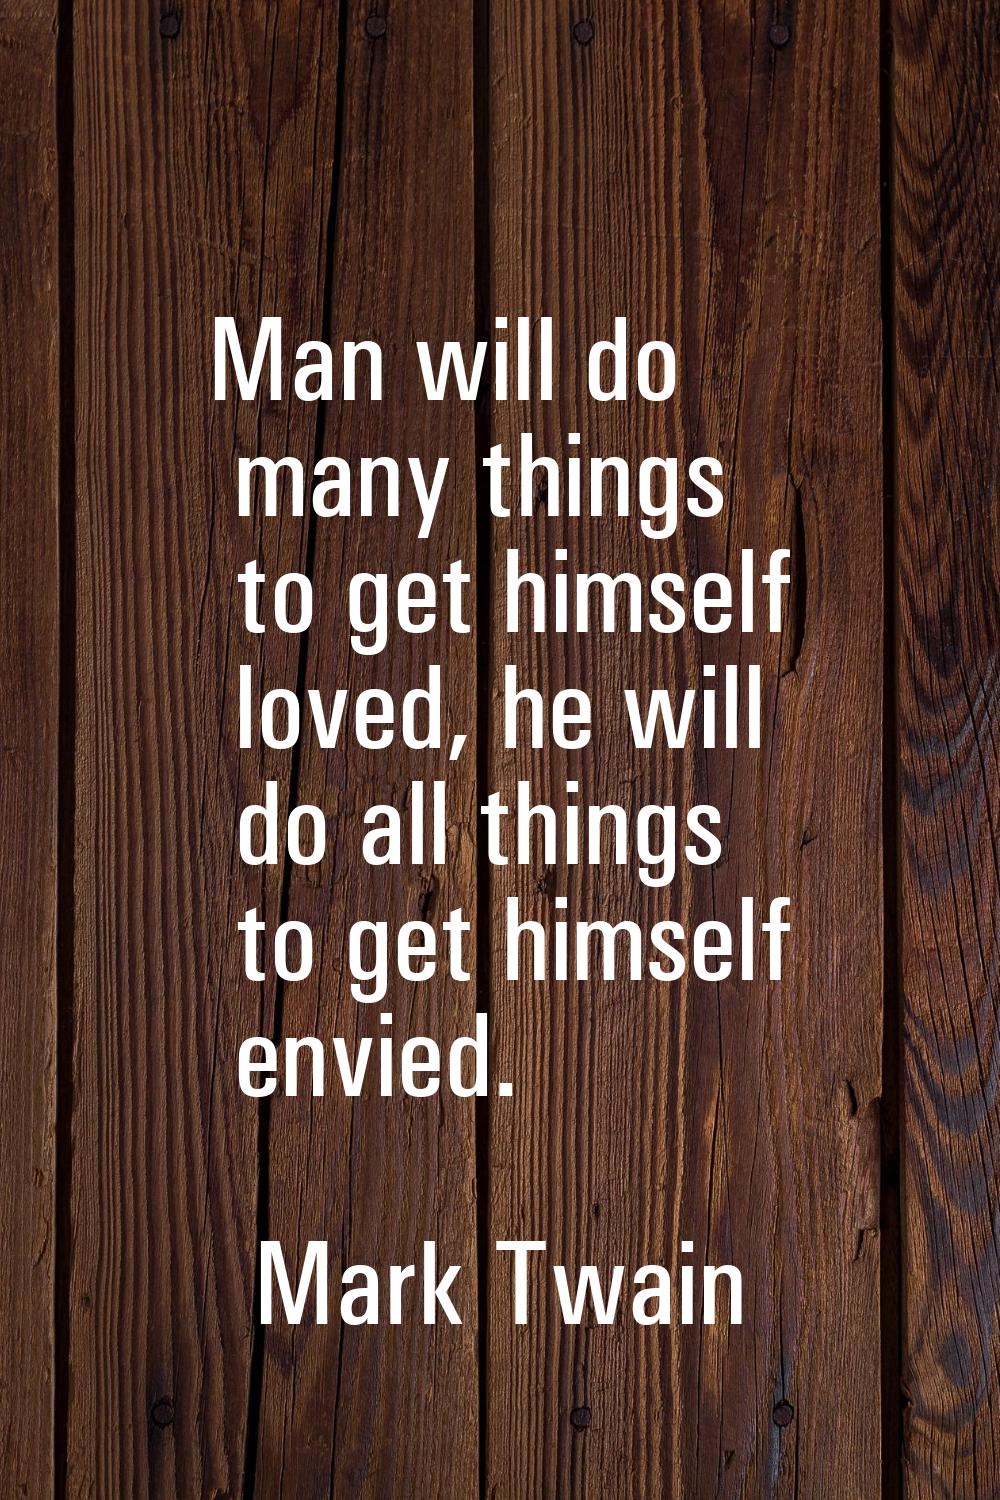 Man will do many things to get himself loved, he will do all things to get himself envied.